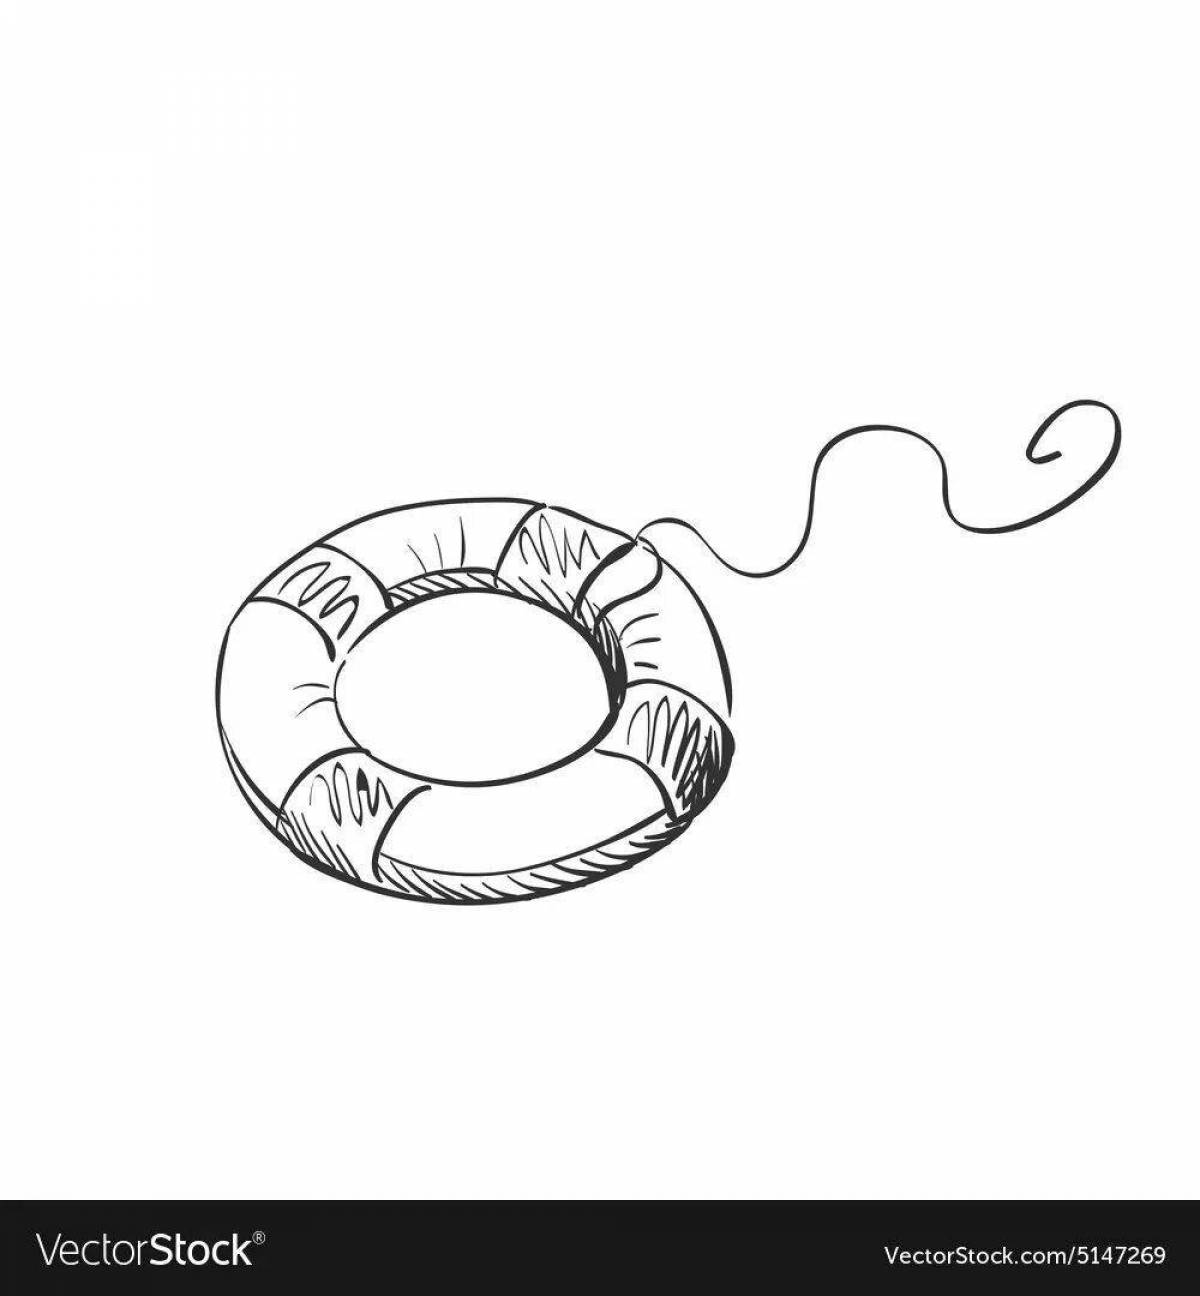 Fun life buoy coloring page for babies